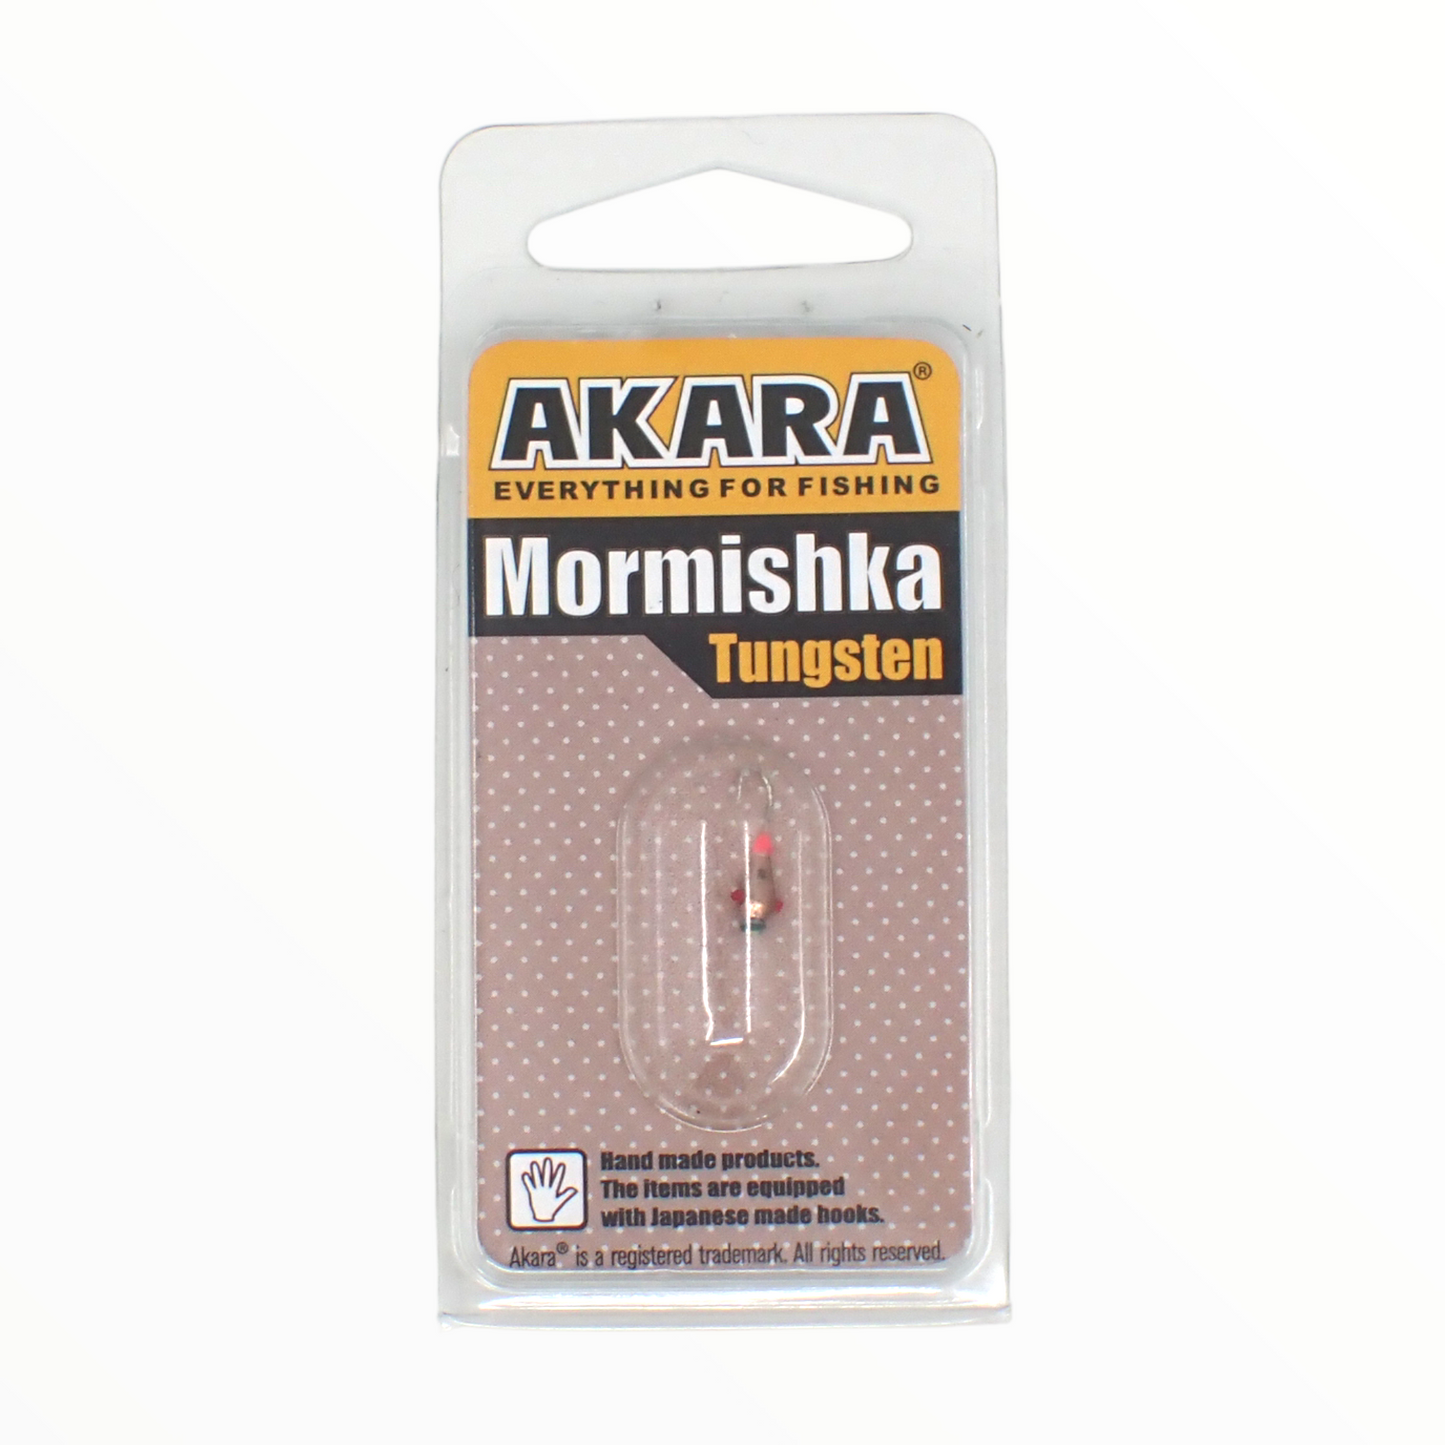 4MM TUNGSTEN MORMISHKA AKARA TEAR DROP WITH A HOLE WITH FACETS WITH KEMBRIK (PLASTIC TUBE) WITH CRYSTAL